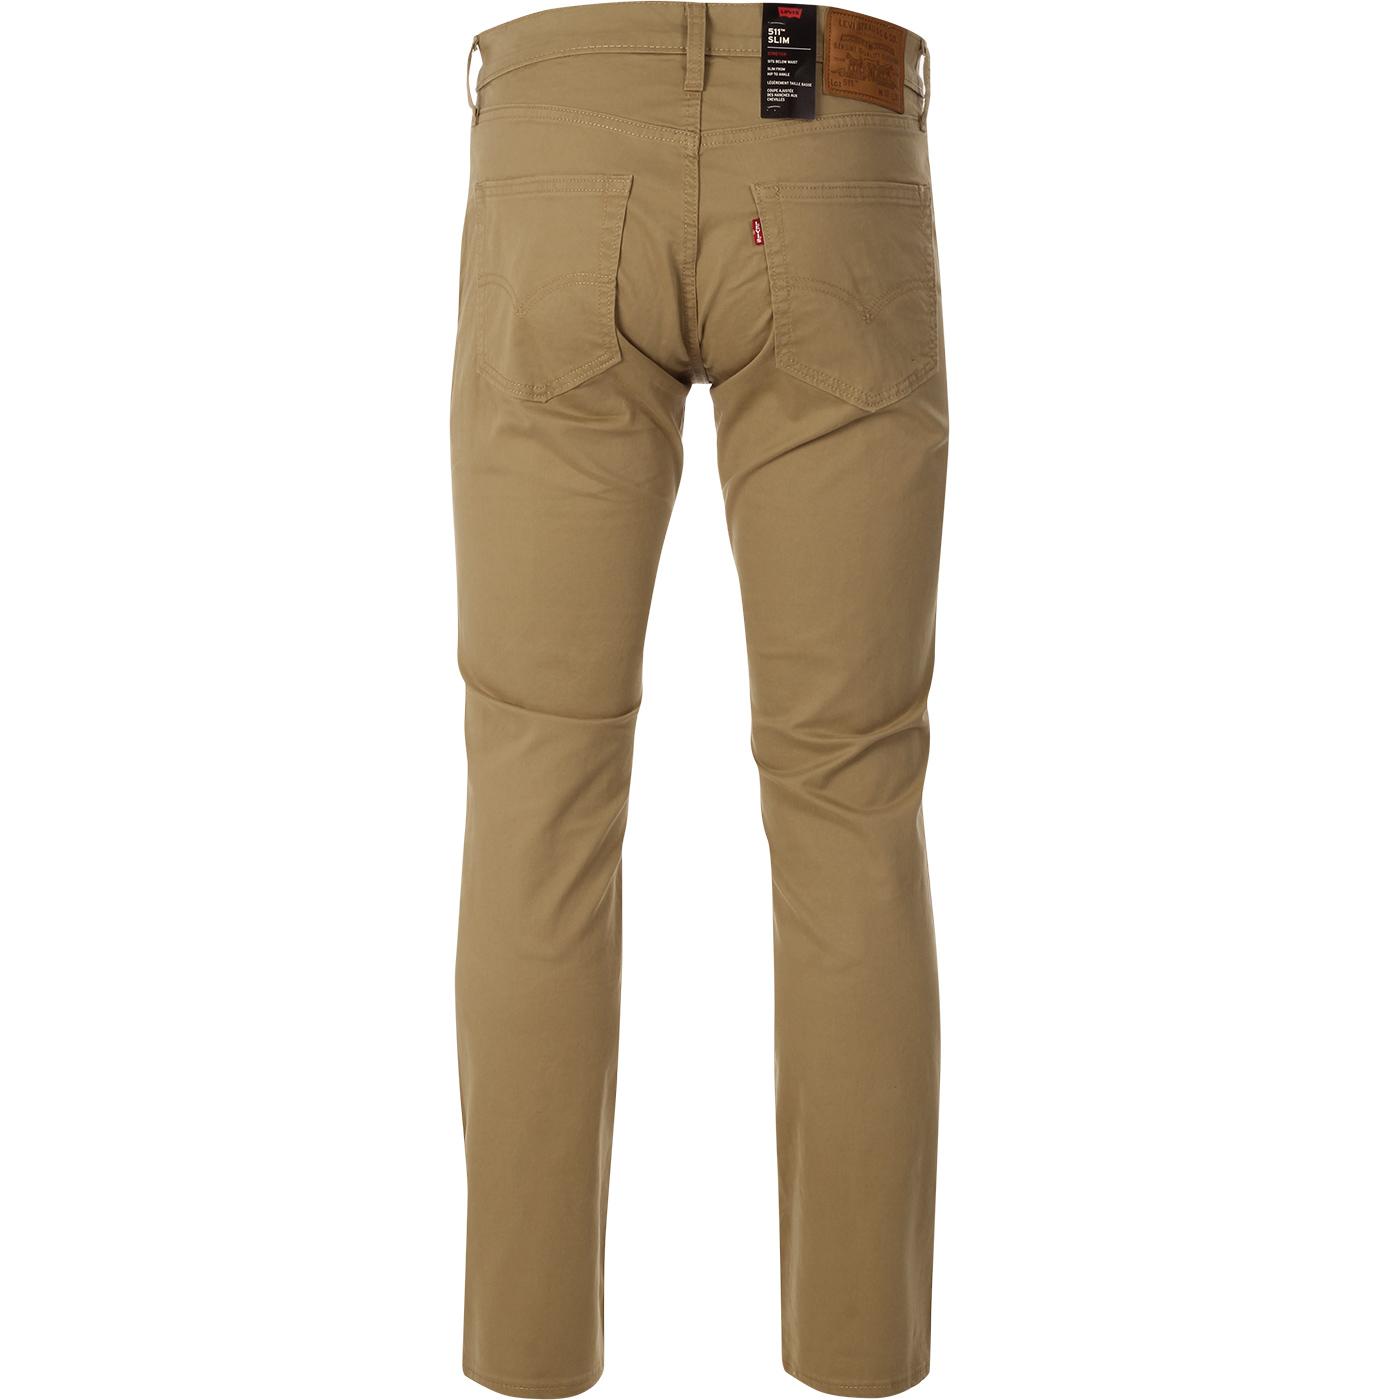 LEVI'S 511 Slim Fit Sueded Sateen Chinos in Harvest Gold